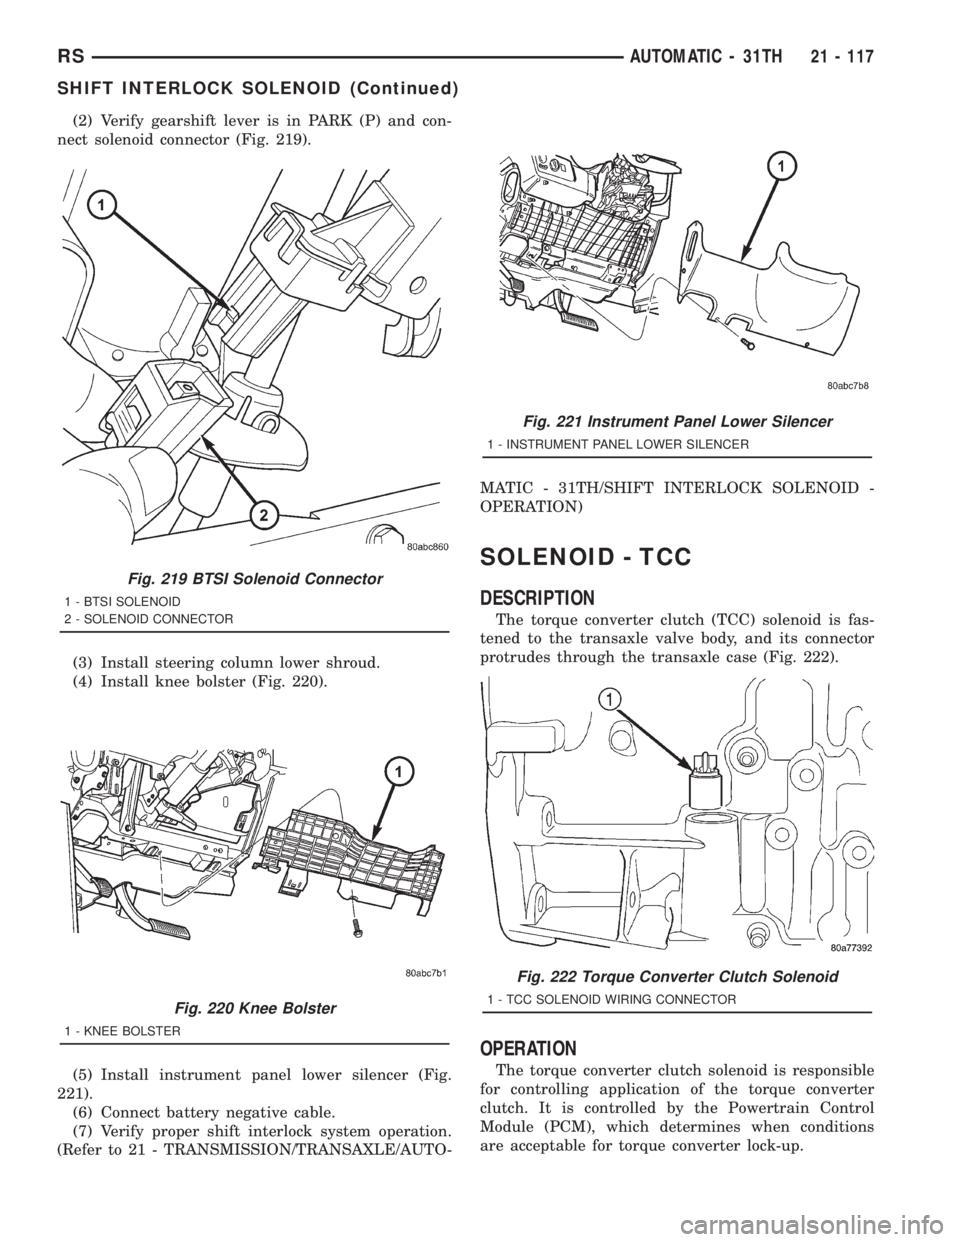 CHRYSLER VOYAGER 2001  Service Manual (2) Verify gearshift lever is in PARK (P) and con-
nect solenoid connector (Fig. 219).
(3) Install steering column lower shroud.
(4) Install knee bolster (Fig. 220).
(5) Install instrument panel lower